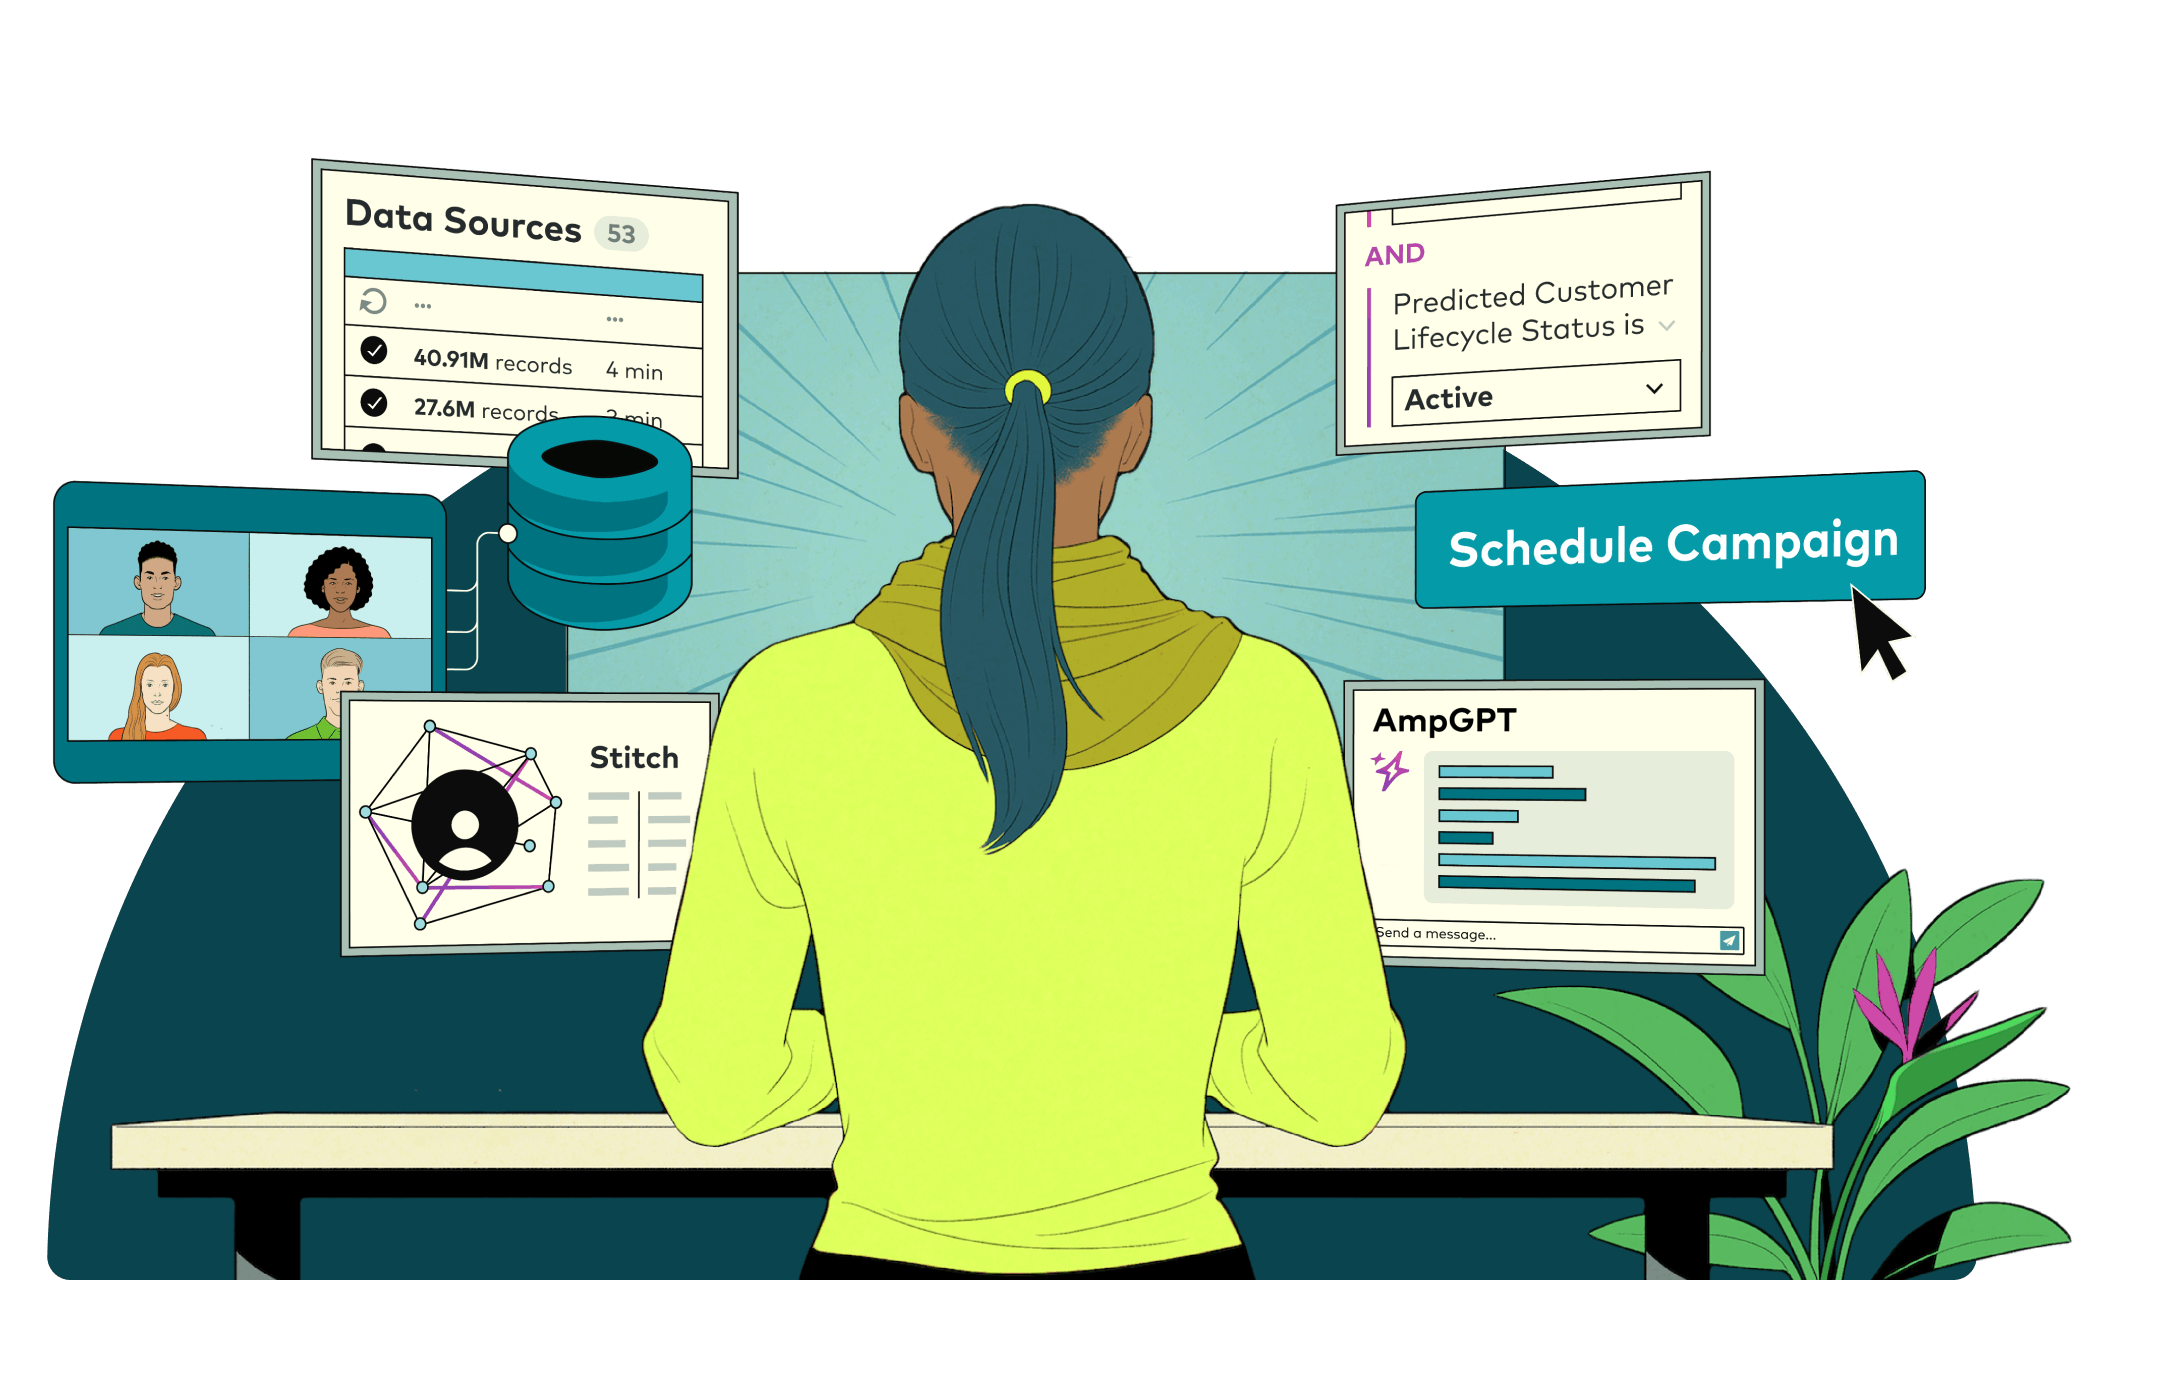 Illustration of woman at a work desk with simulated CDP product screens and elements around her.  